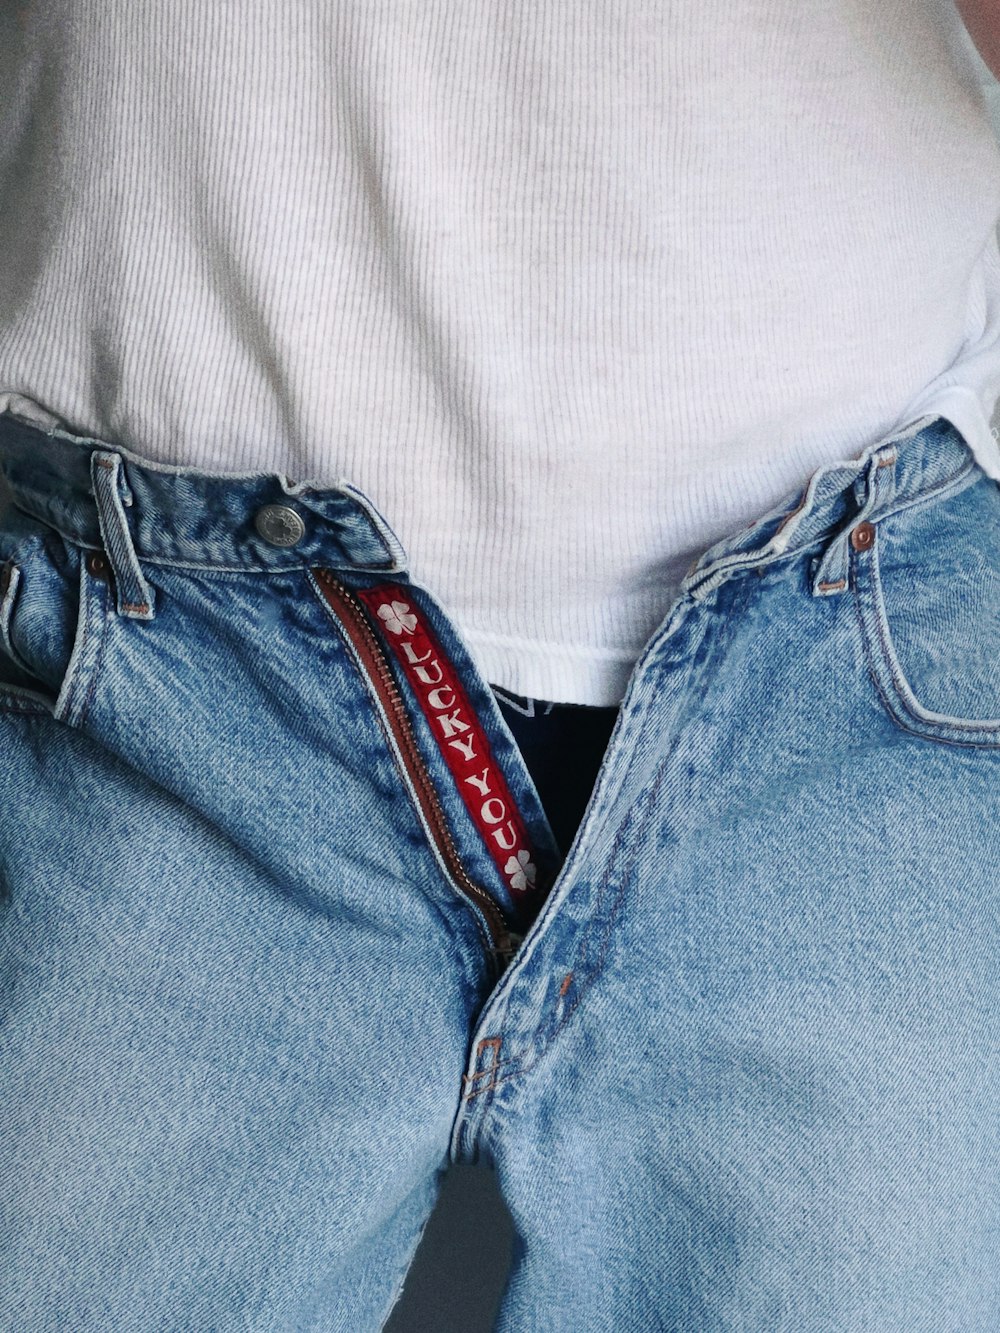 a person's jeans with a red label on it